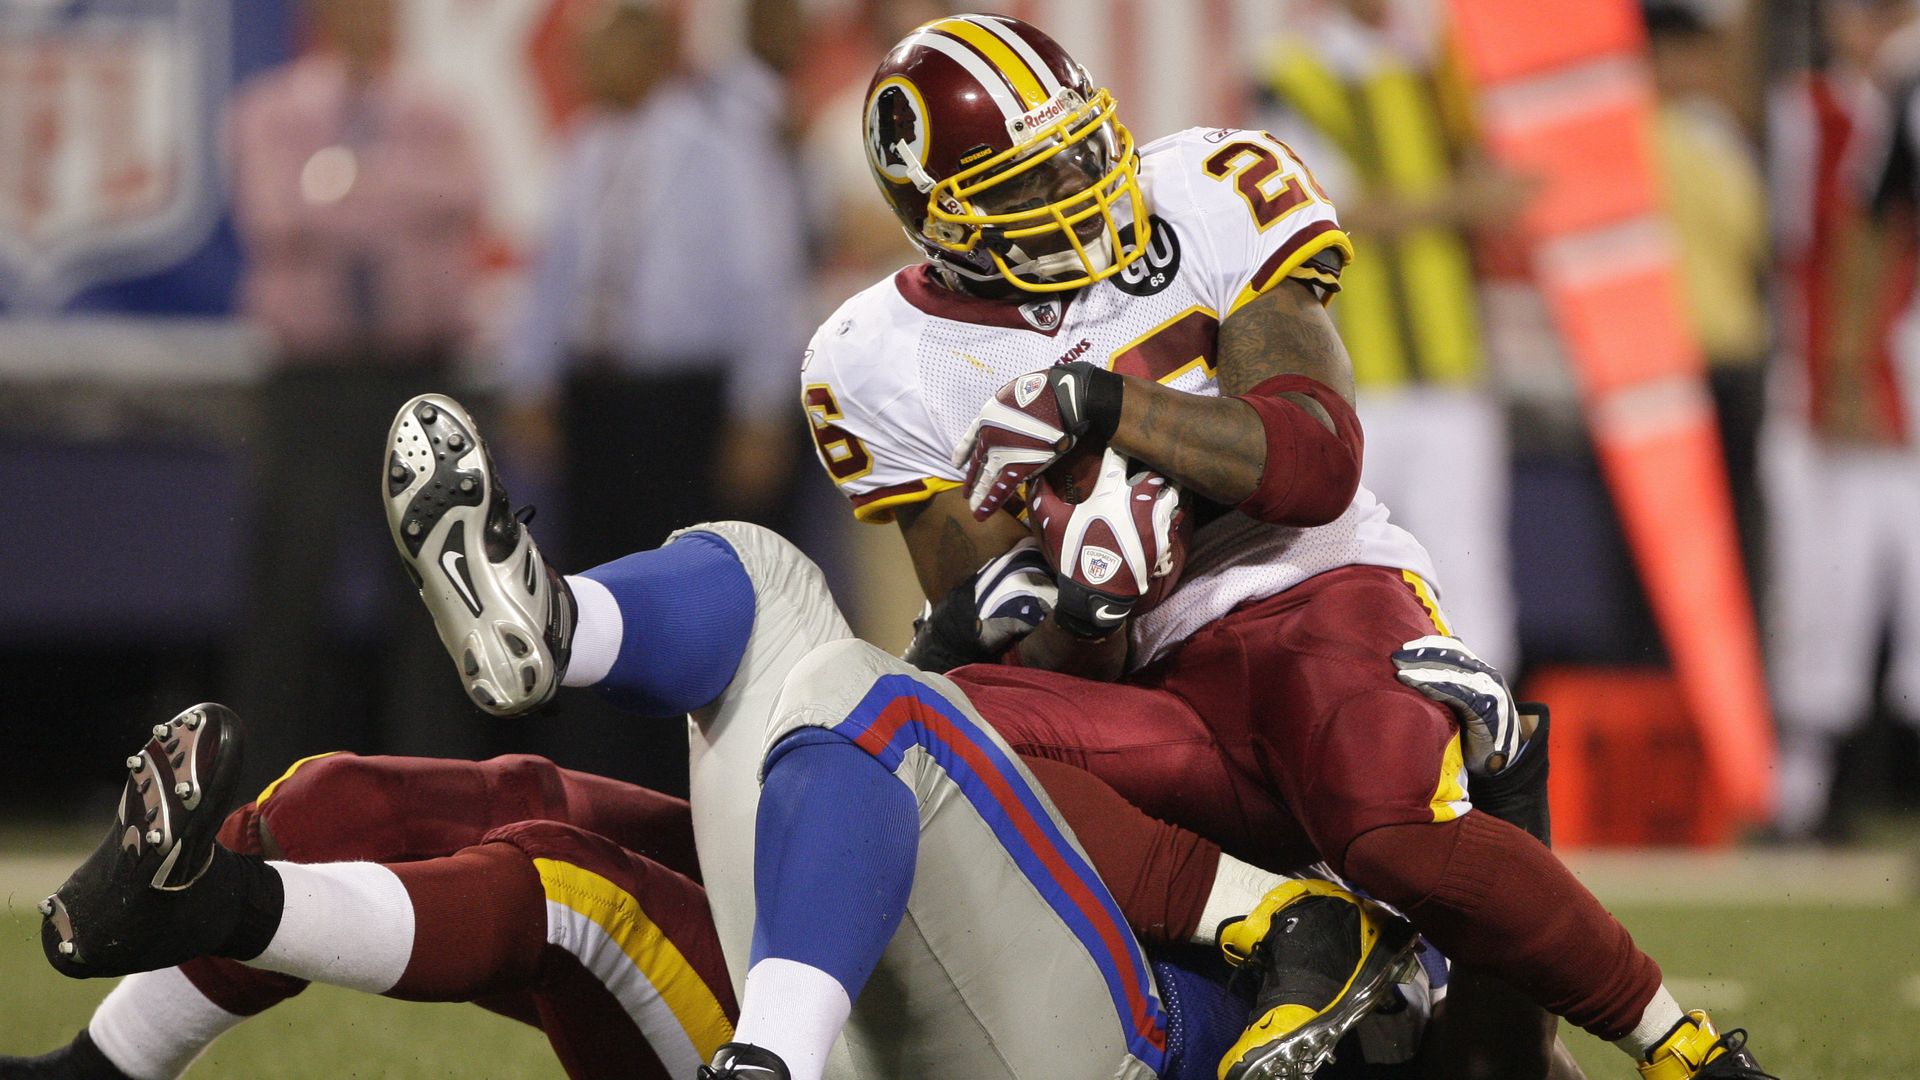 Washington Redskins running back Clinton Portis (26) during the game at Giants Stadium in East Rutherford, NJ